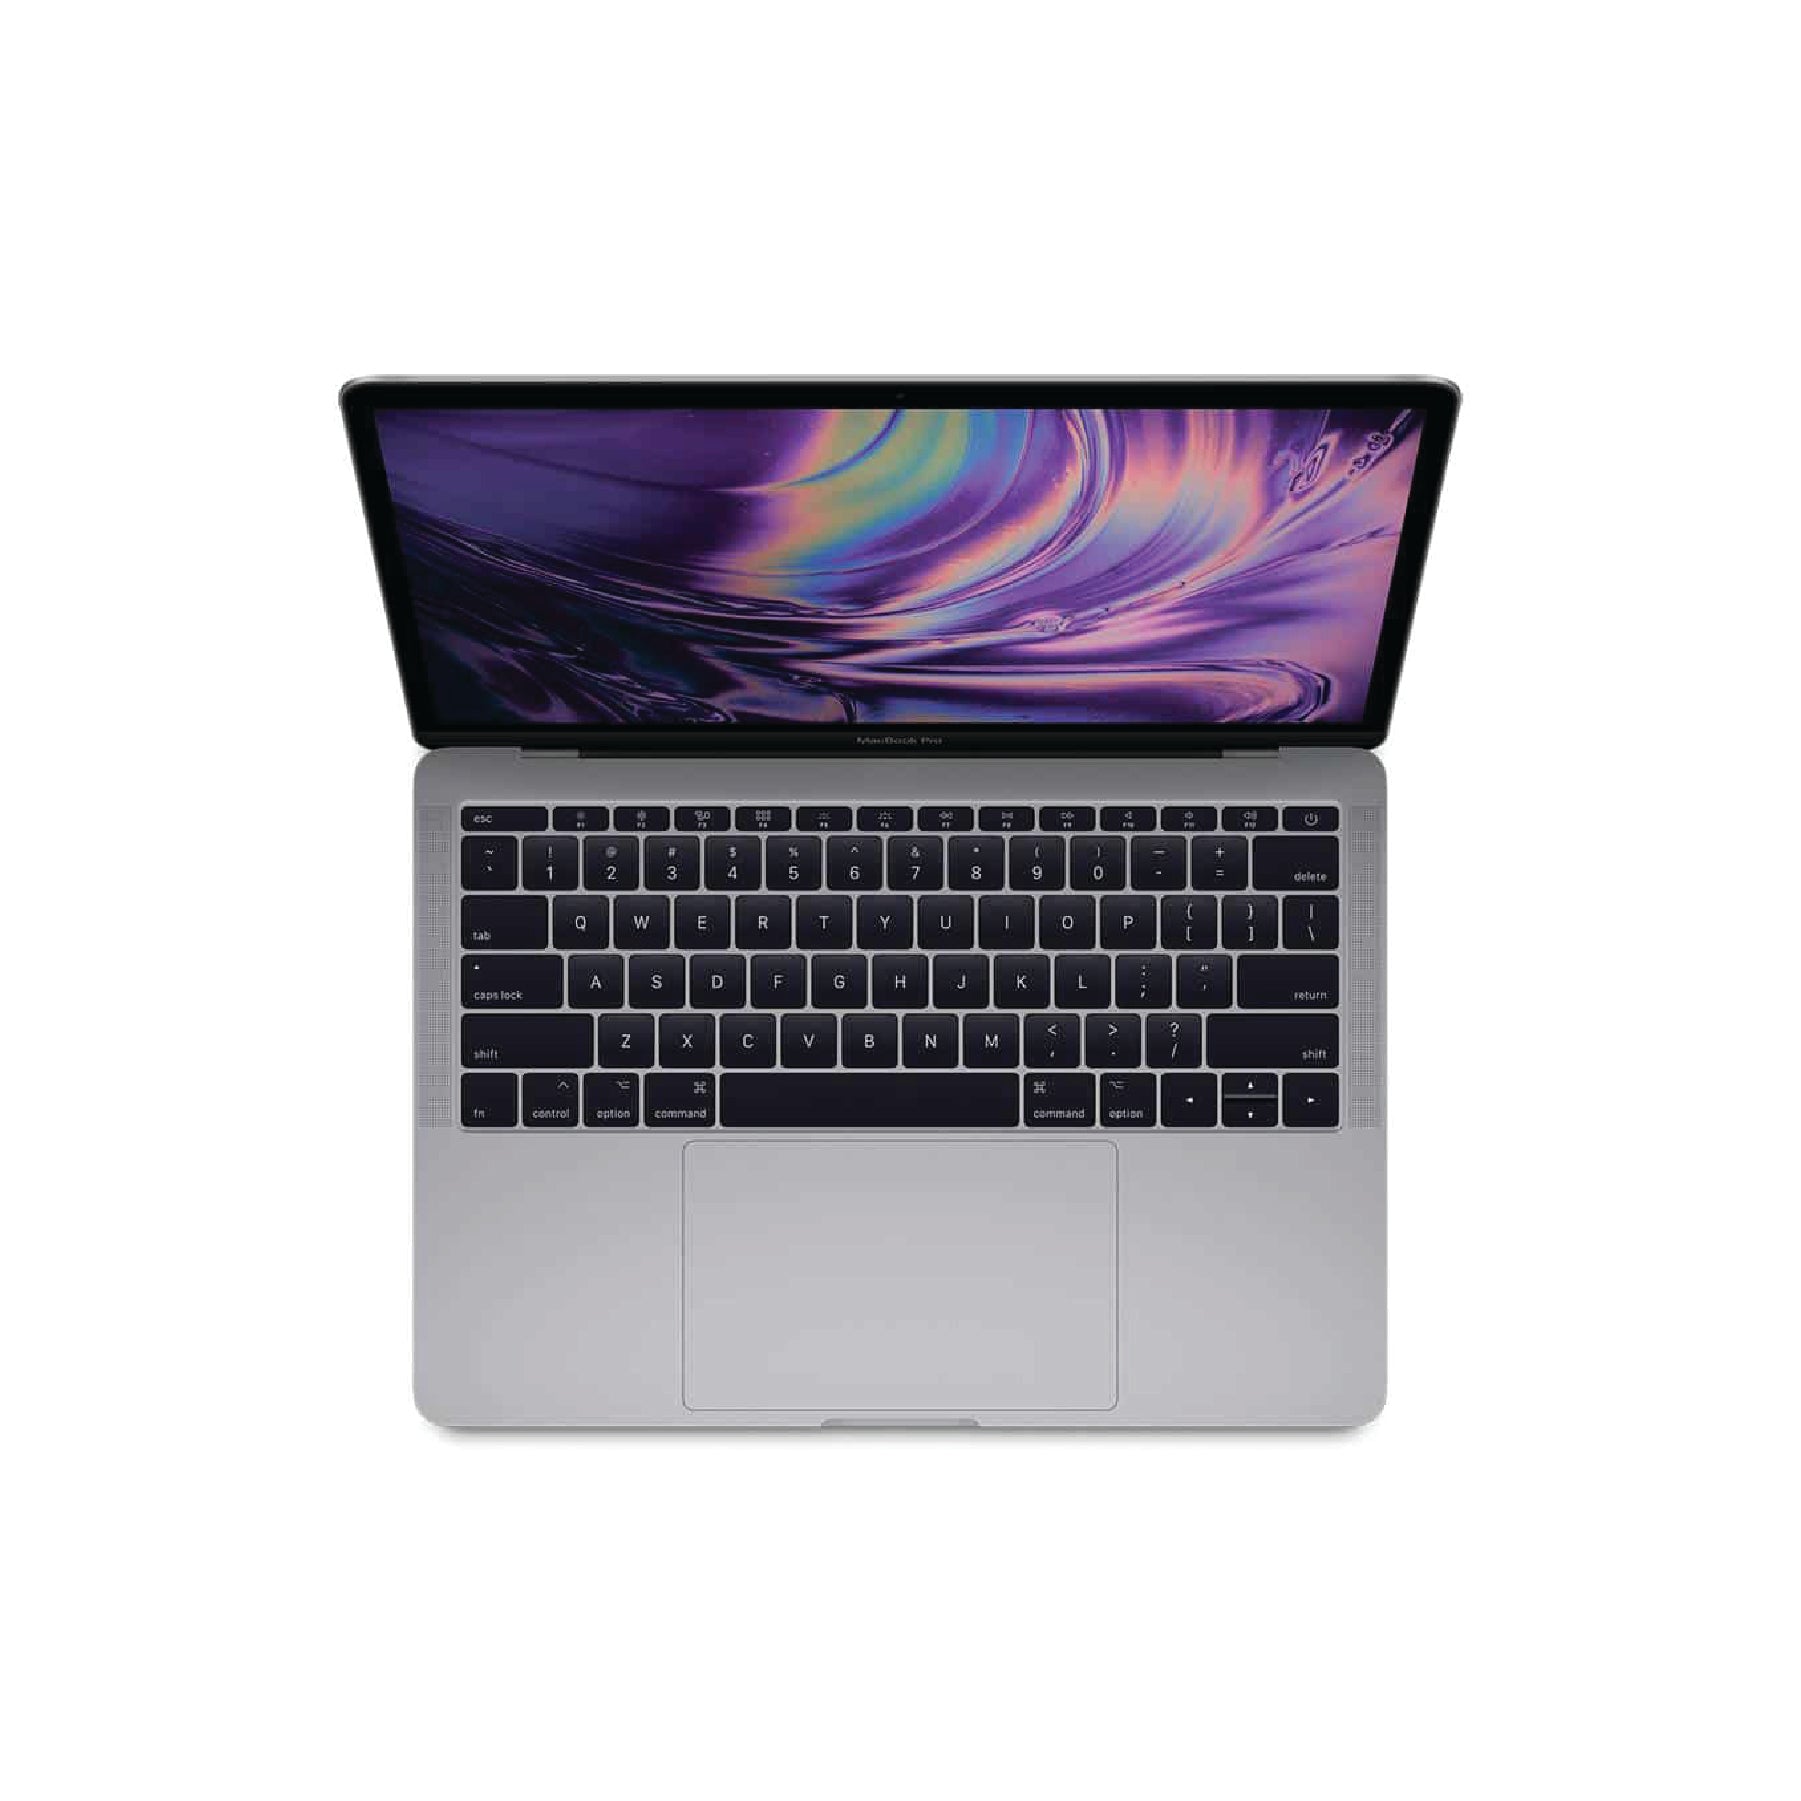 MacBook Pro (13-inch, 2016, Two Thunderbolt 3 ports) 2.0GHz, Intel Core i5 256GB - Space Grey (Better) - iStore Pre-owned